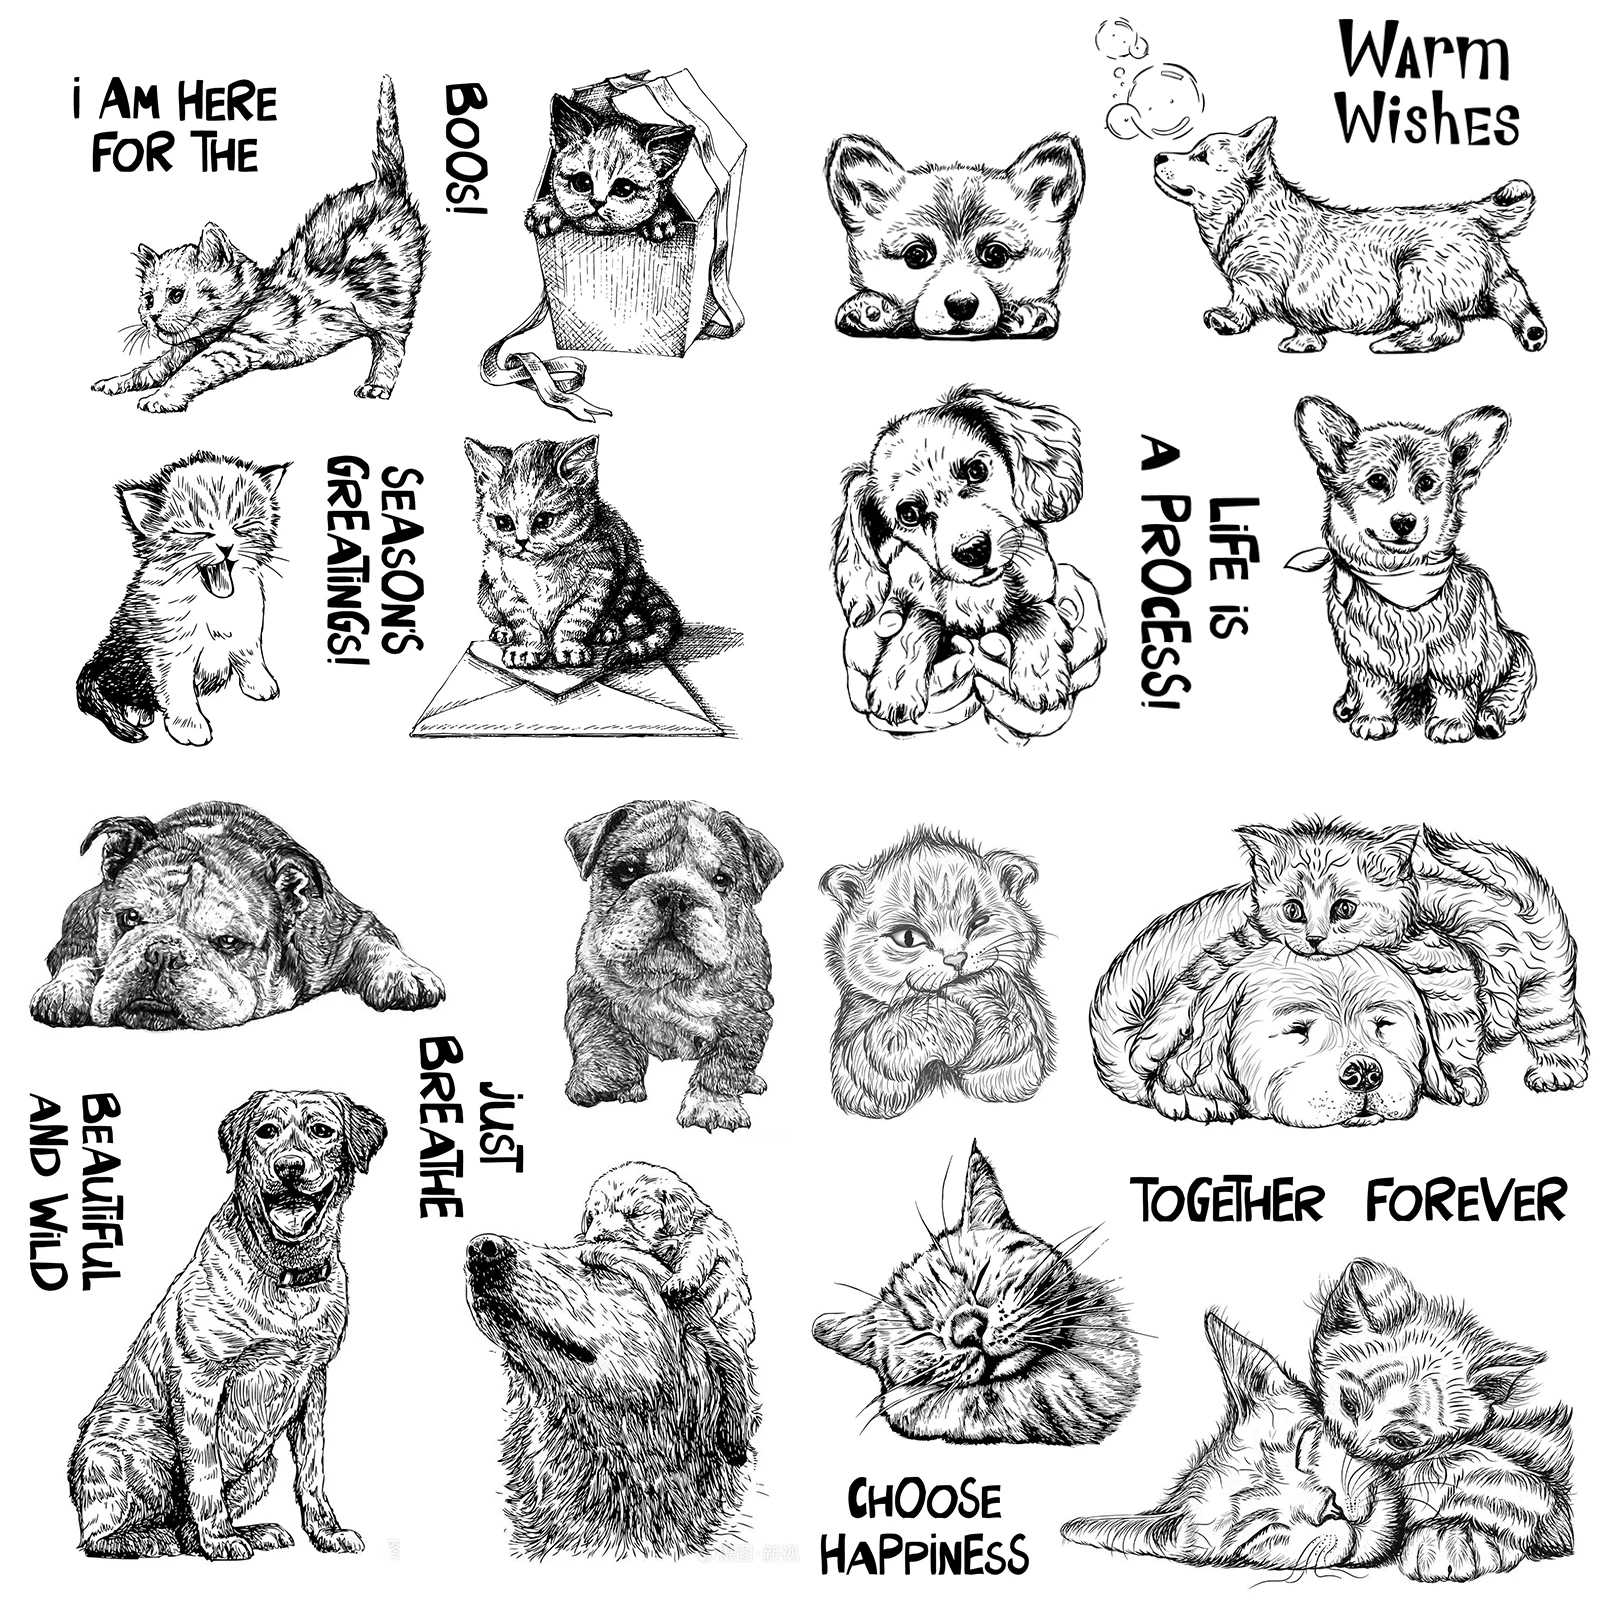 Hand Drawn Cartoon Cats and Dogs Clear Stamps and Cutting Dies For DIY Scrapbooking/Card Making/Album Decorative Fun Crafts NEW